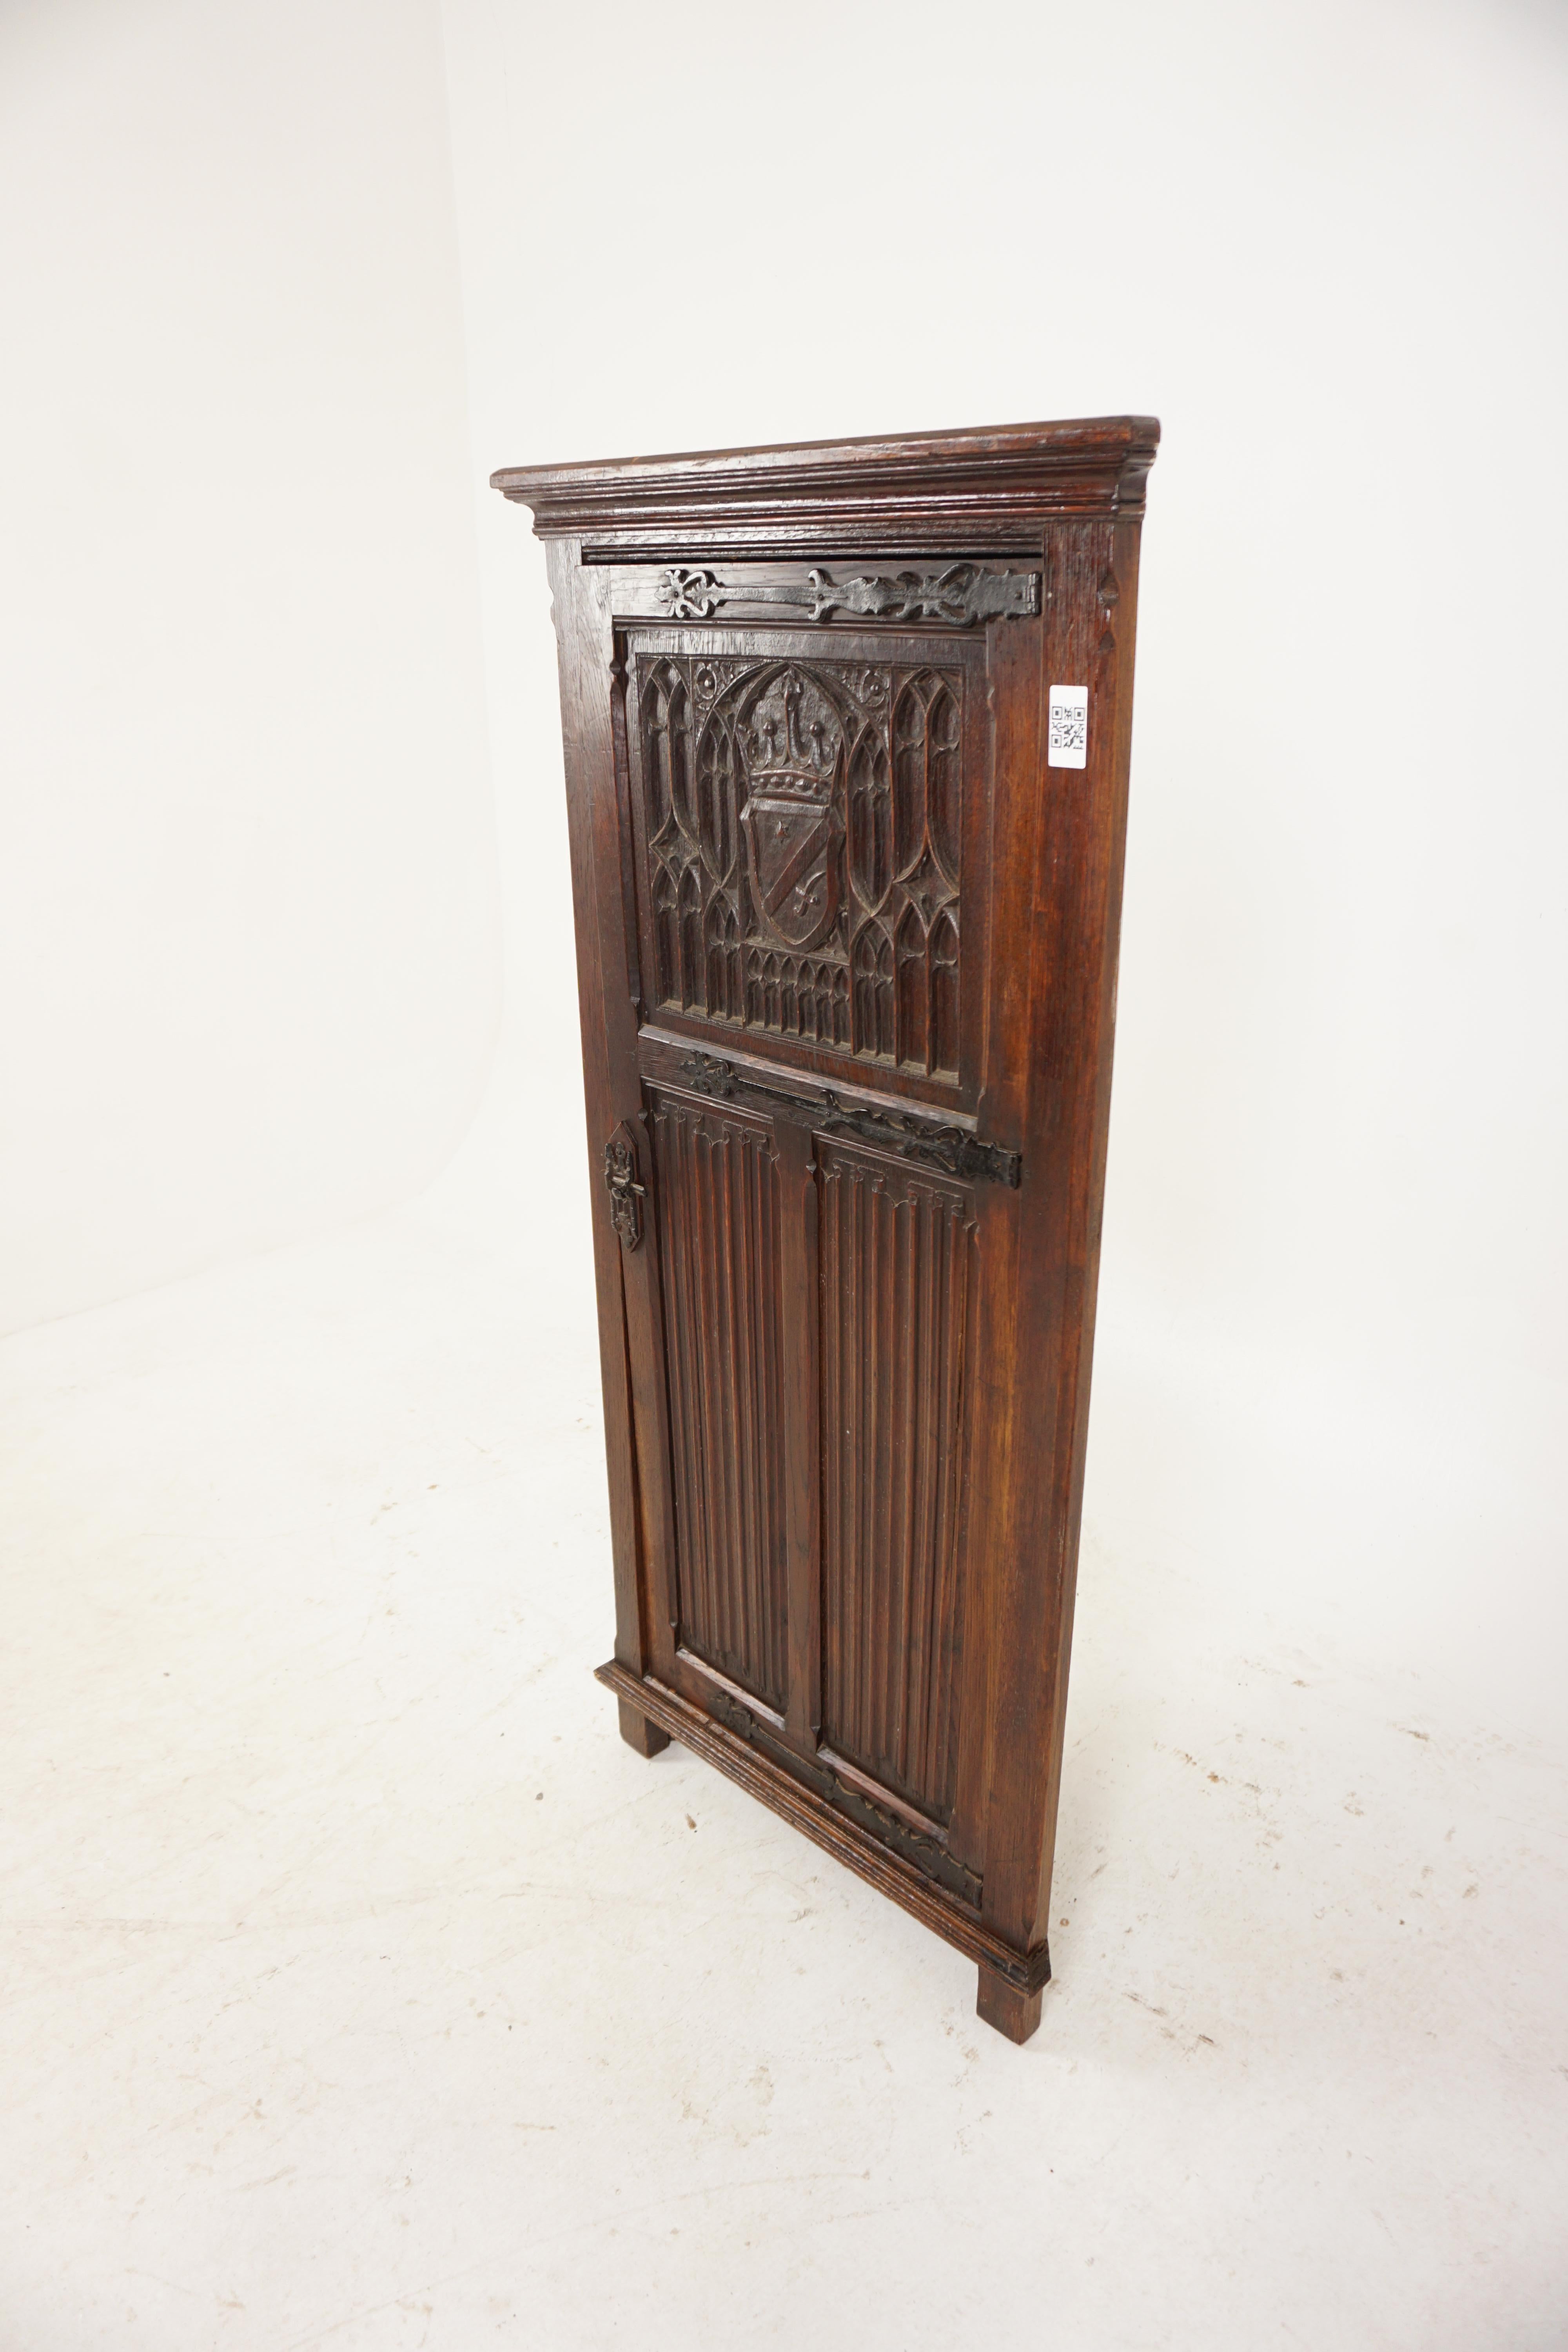 Antique Oak Cabinet, Carved Oak Gothic Style Corner Cabinet, Antique Furniture, Scotland 1900, H991
 
+ Scotland 1900
+ Solid oak
+ Original finish
+ Flared cornice on top
+ Single heavily carved panel door with carved crown
+ Shield top